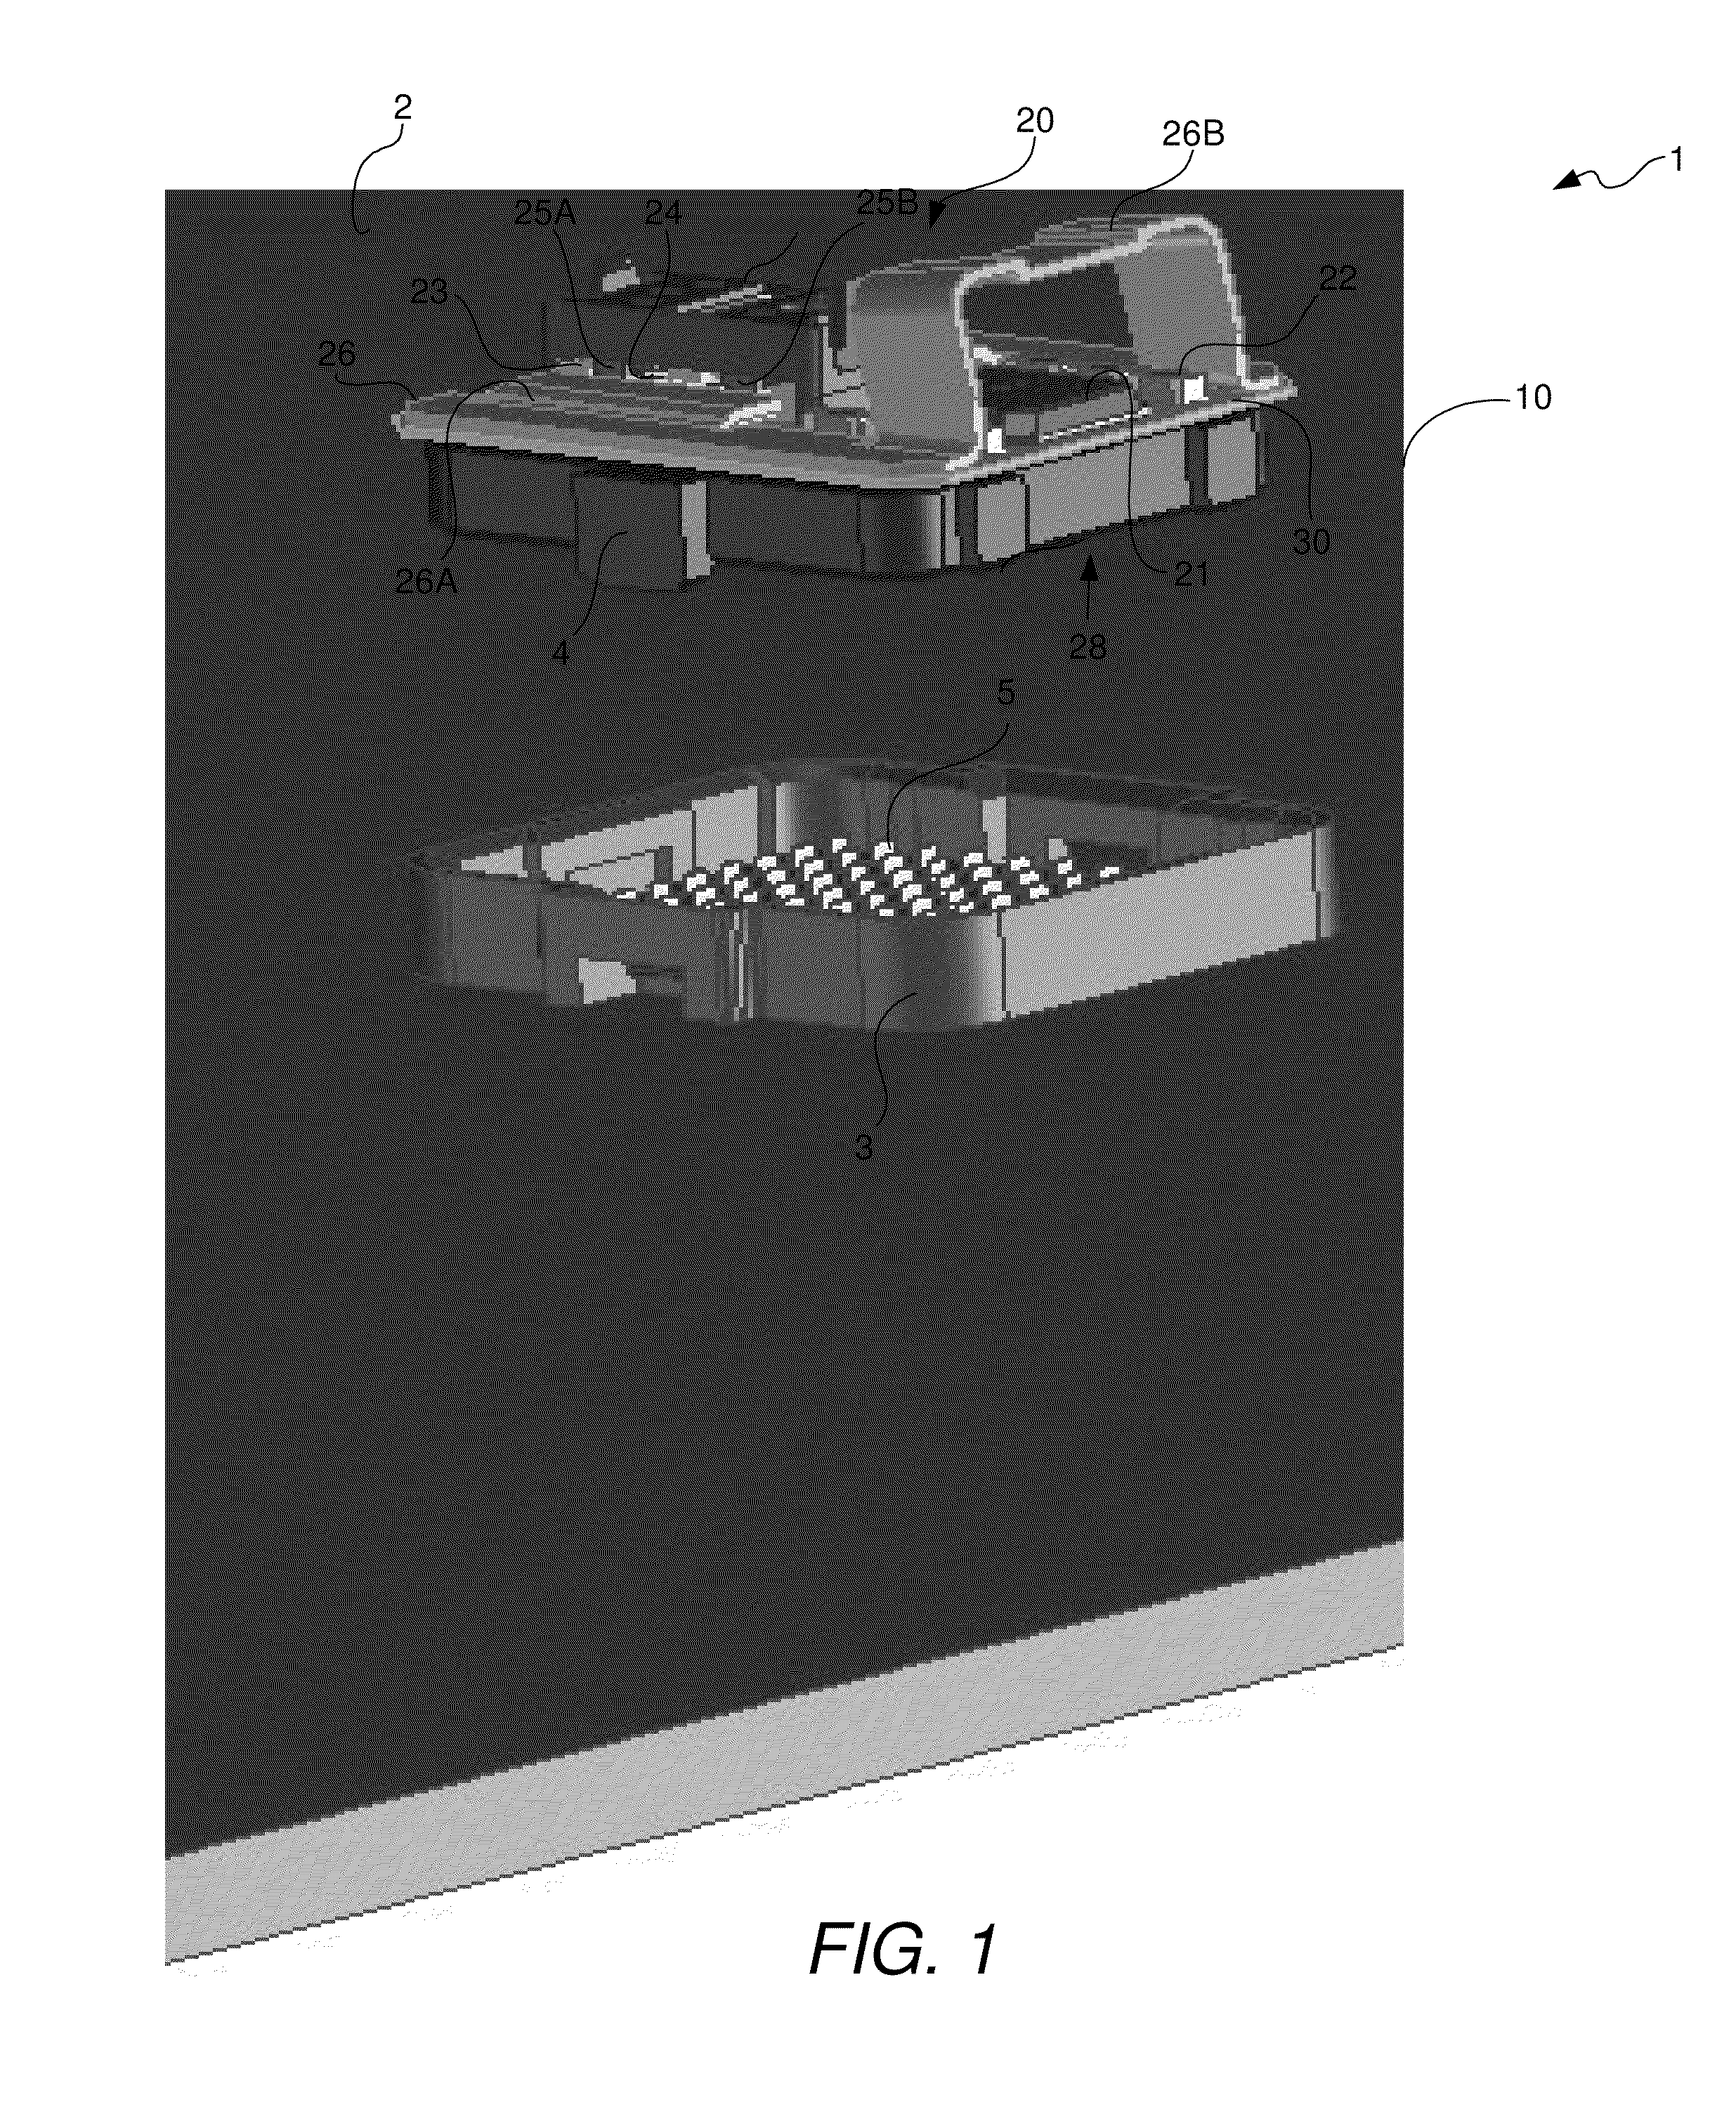 Mid-plane mounted optical communications system and method for providing high-density mid-plane mounting of parallel optical communications modules